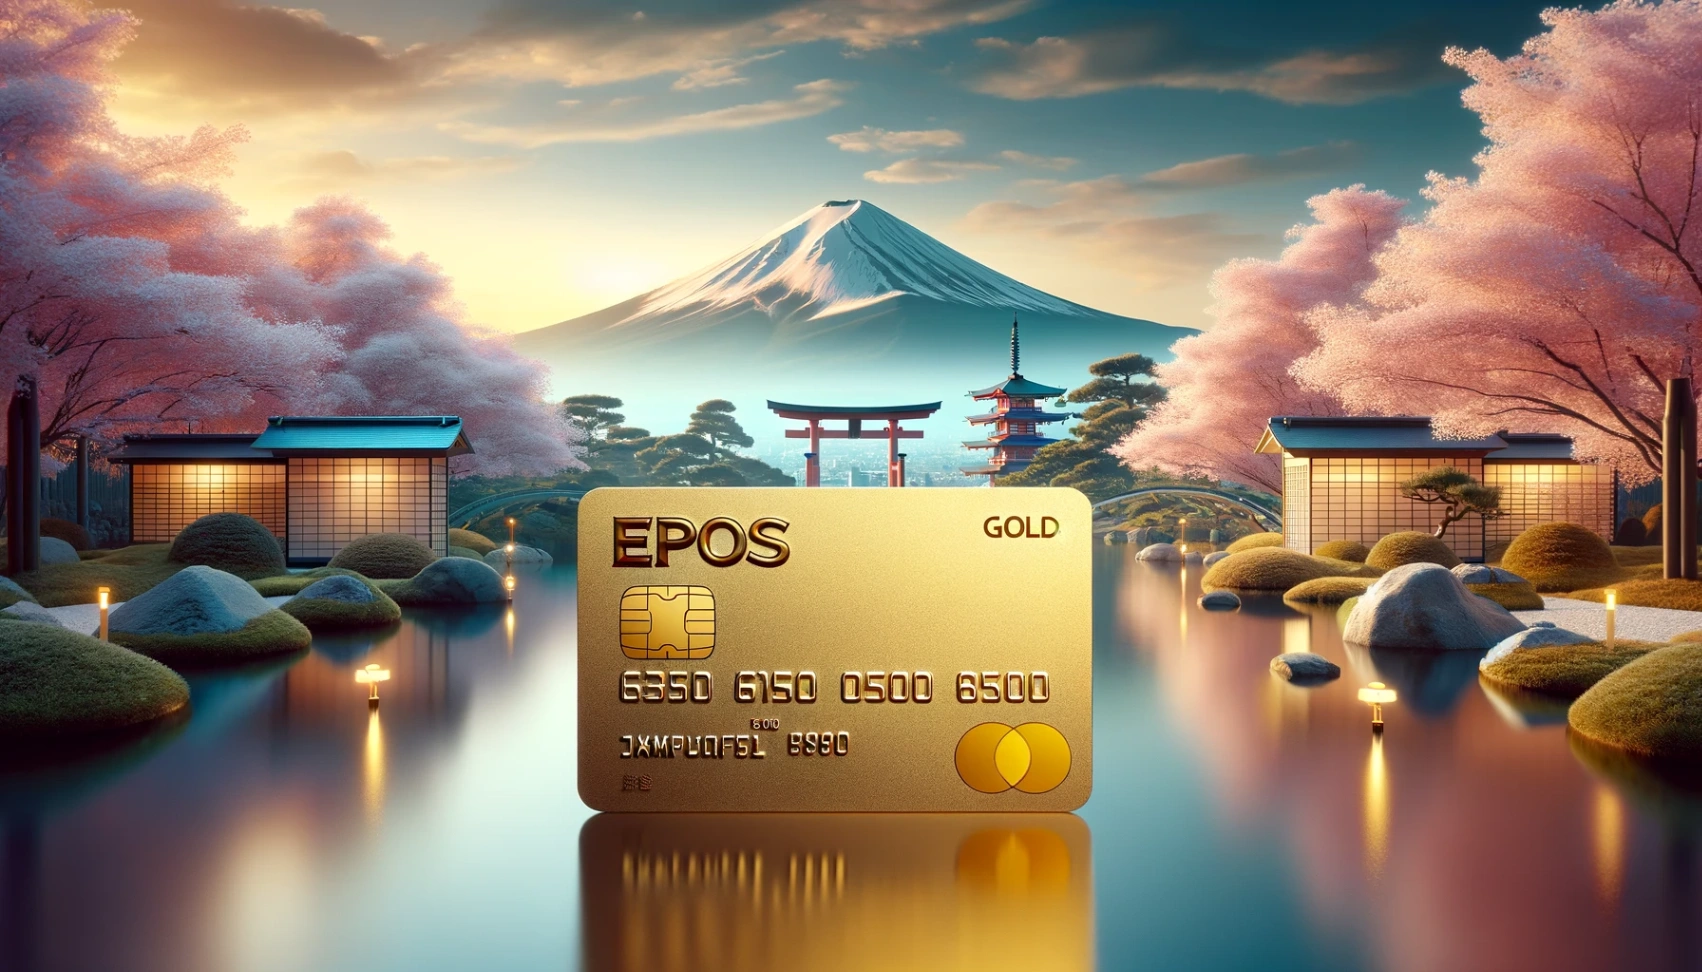 Epos Gold Credit Card - How to Apply